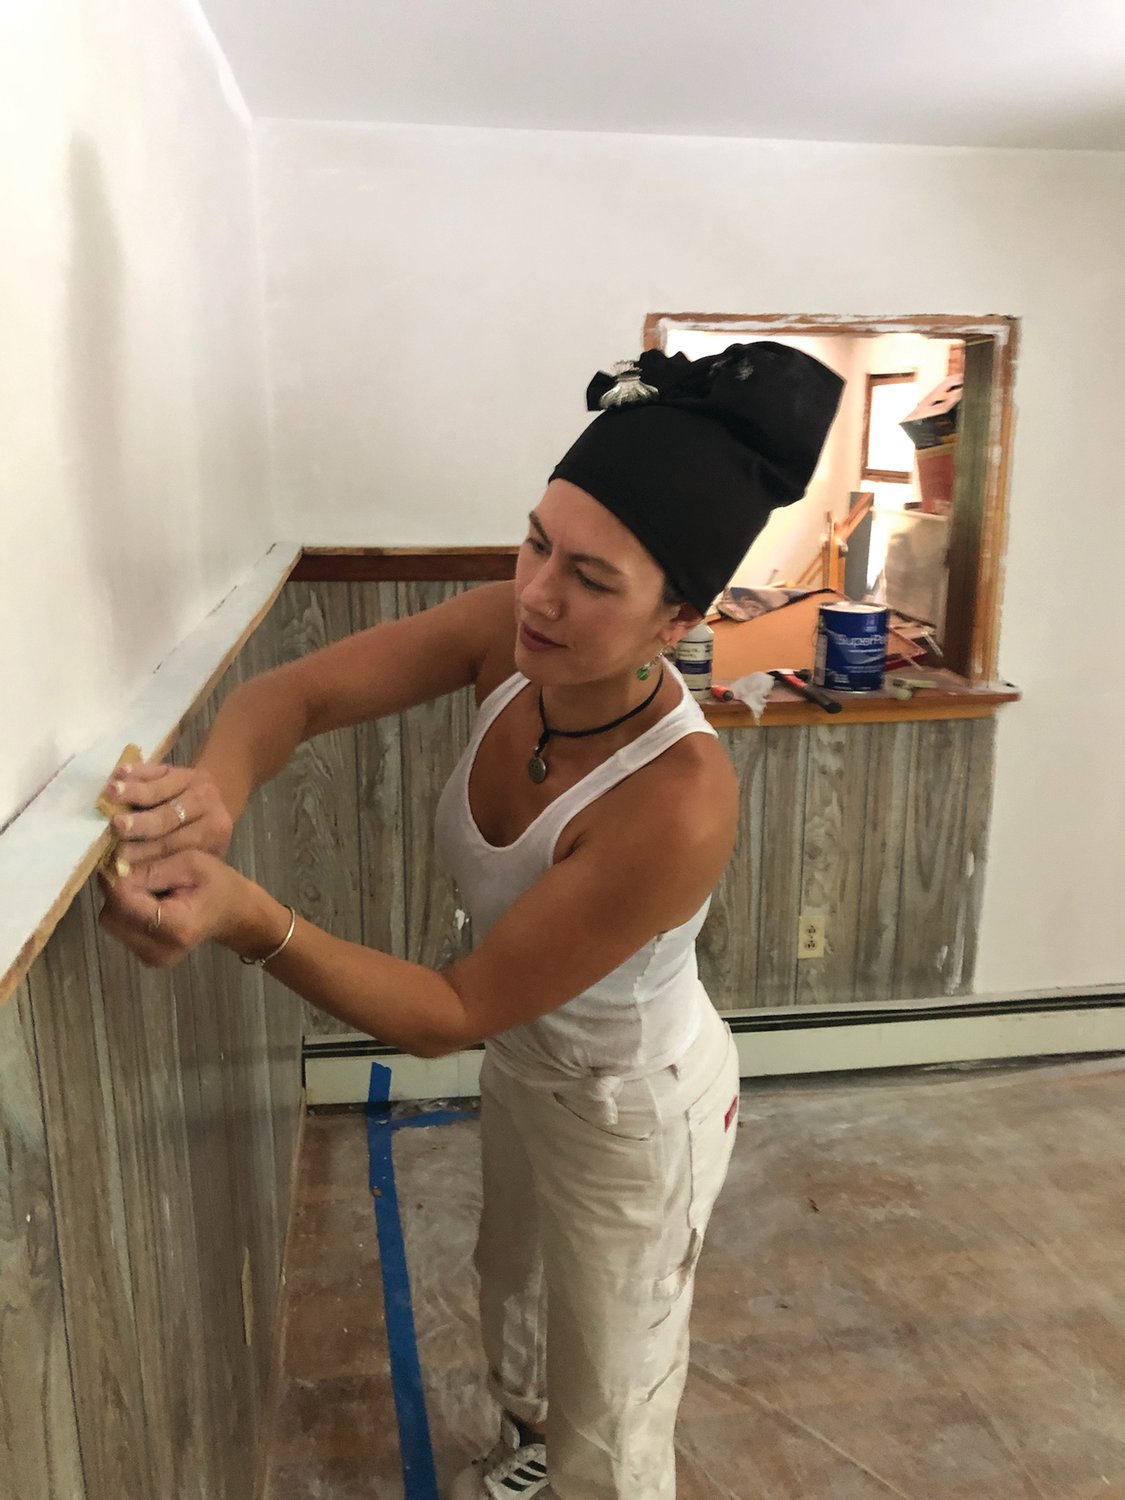 HARD WORK: N.E. Building & Restoration Project Manager Chanya Sae-Eaw worked hard on Pavia’s home. She and contracting business owner David Rosati went way above and beyond in their efforts to restore the veteran’s home to livability.